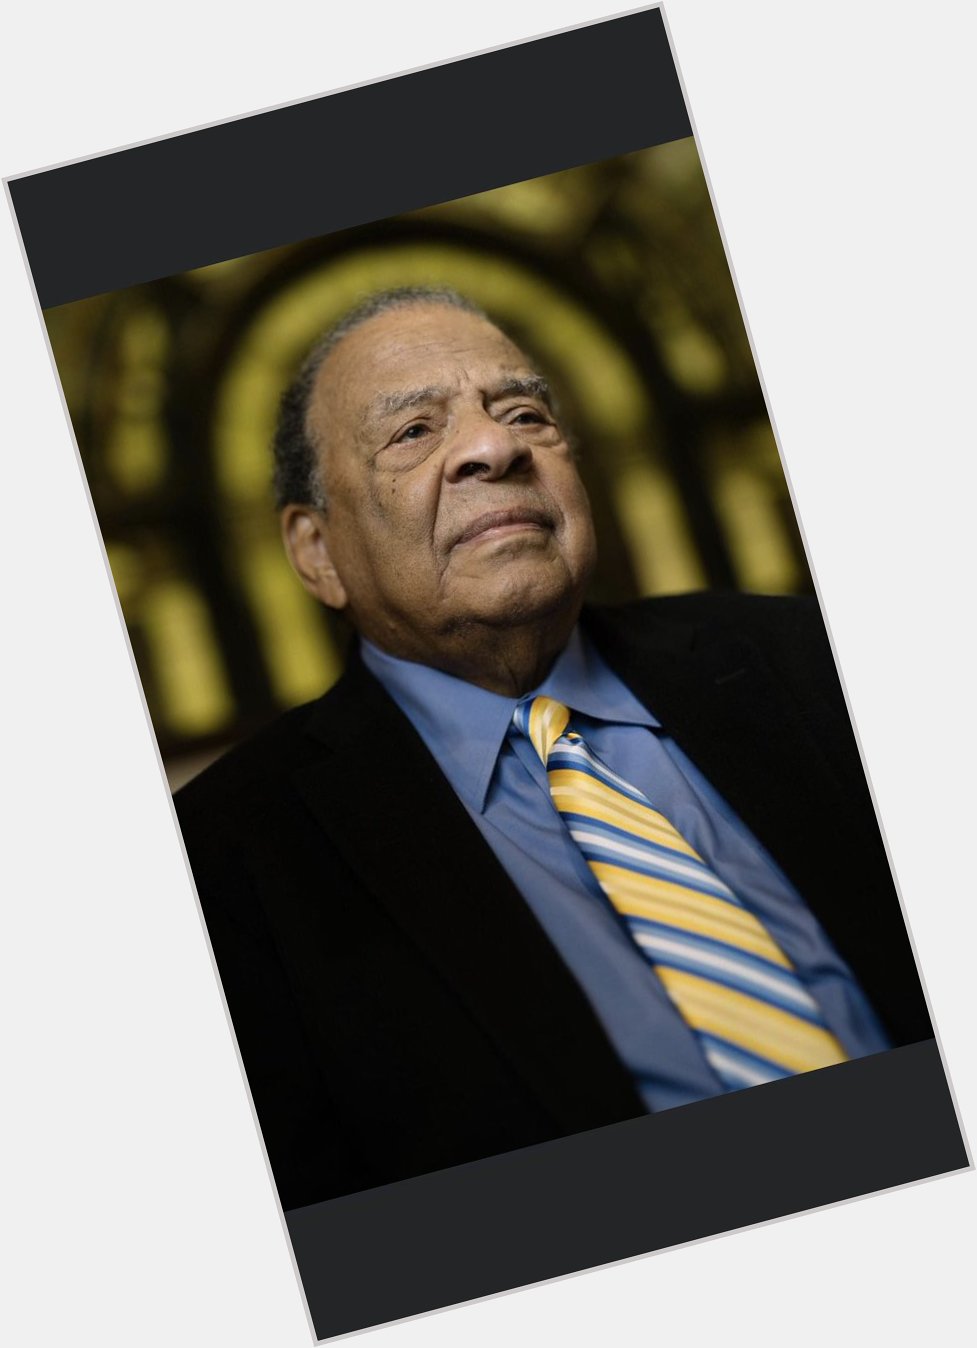 Happy Birthday Andrew Young Jr.-politician, diplomat, activist. Executive director of SCLC. 